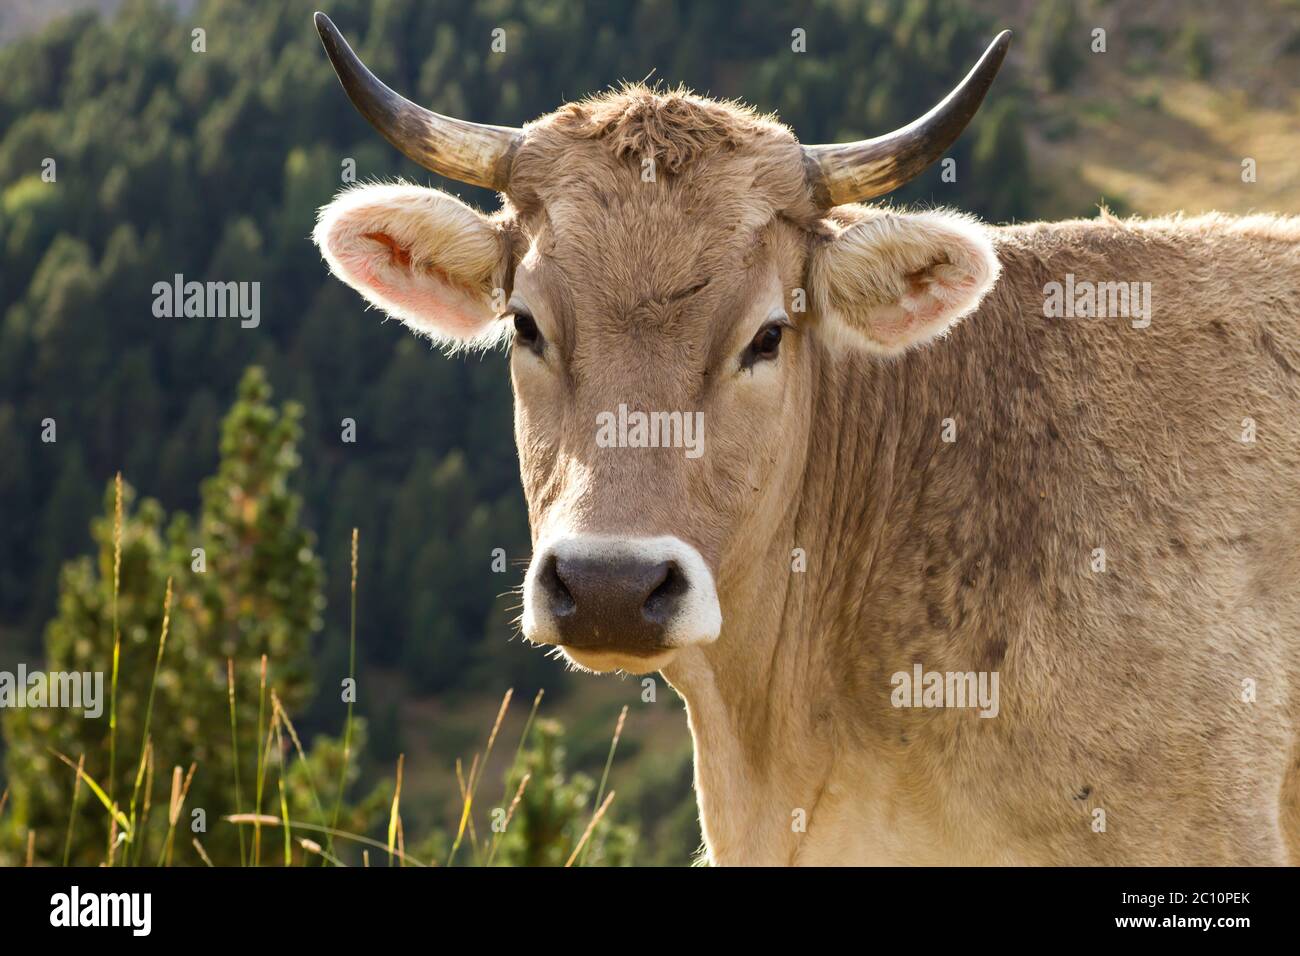 Cattle breeding in the mountains Stock Photo